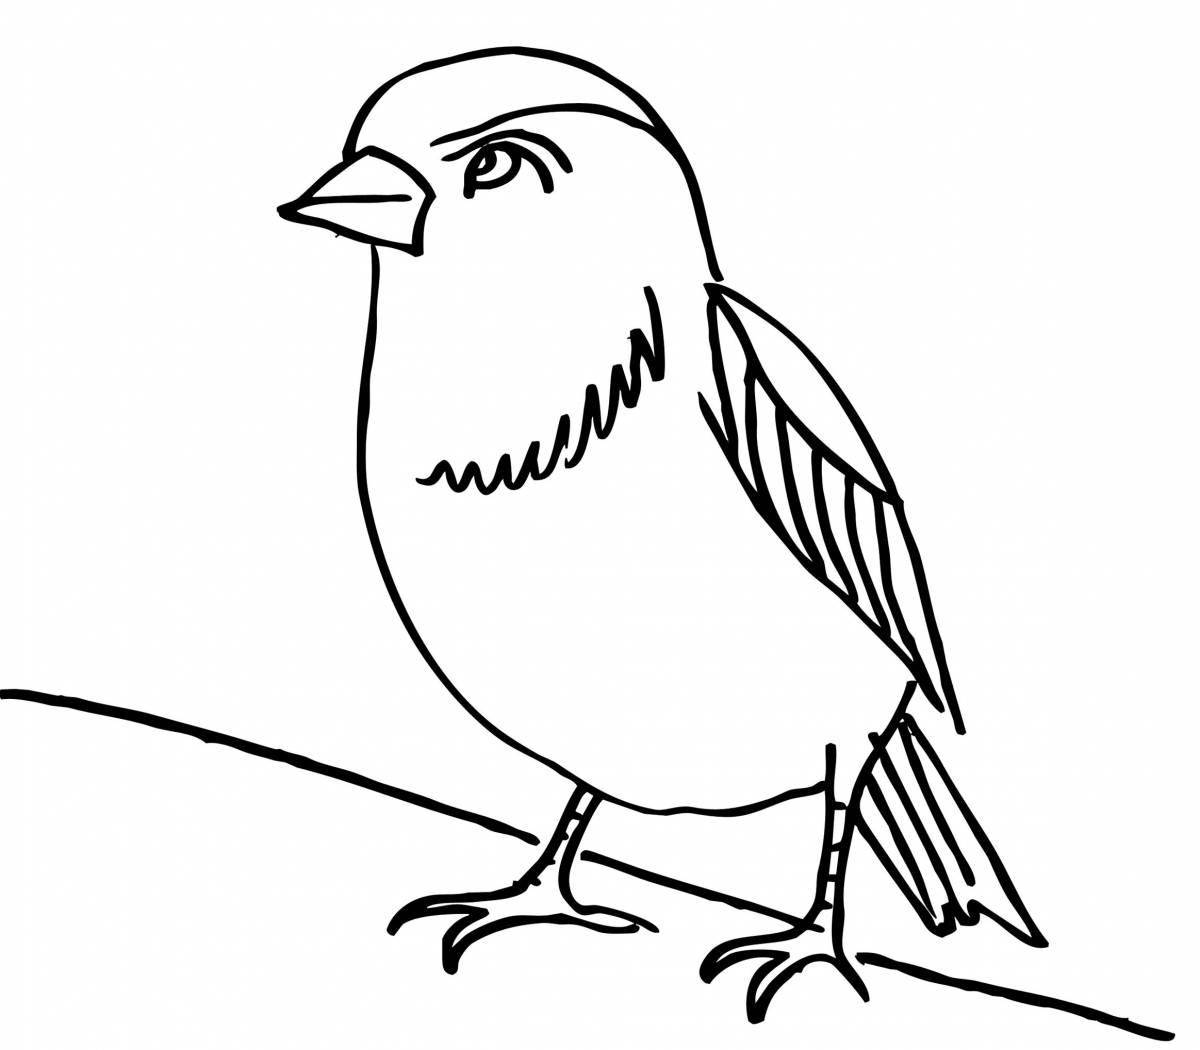 Charming sparrow coloring book for 6-7 year olds